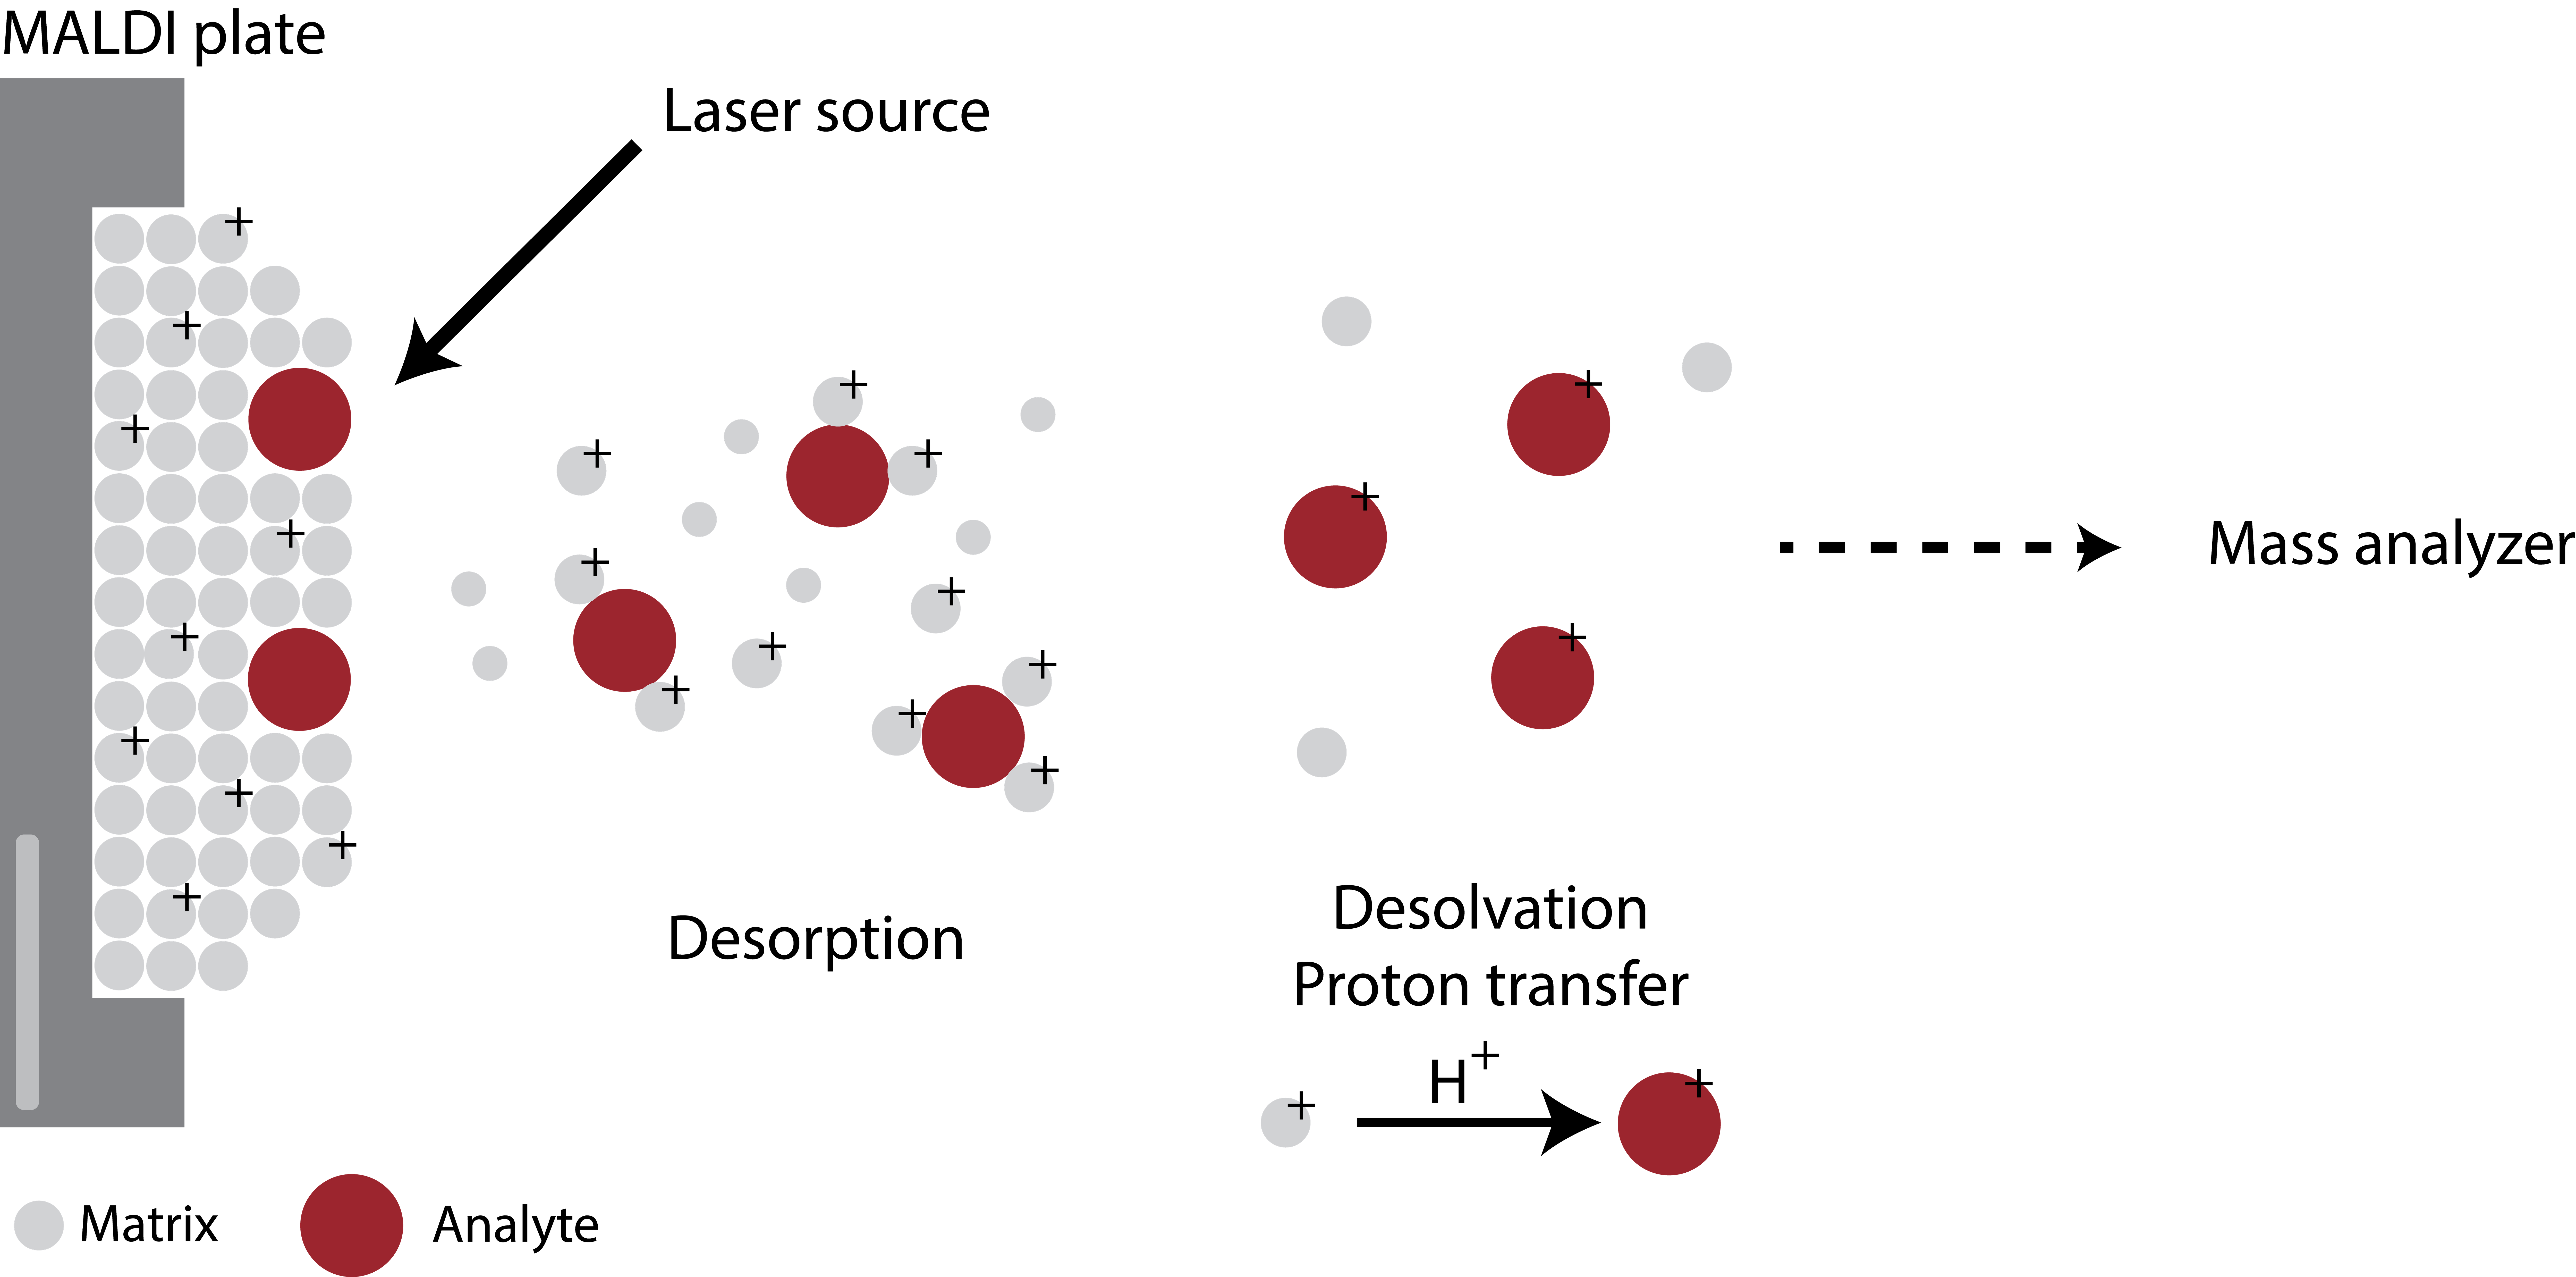 Figure 6: MALDI The analyte-matrix mixture is irradiated by a laser source, leading to ablation. Desorption and proton transfer ionize the analyte molecules that can then be accelerated into a mass spectrometer.